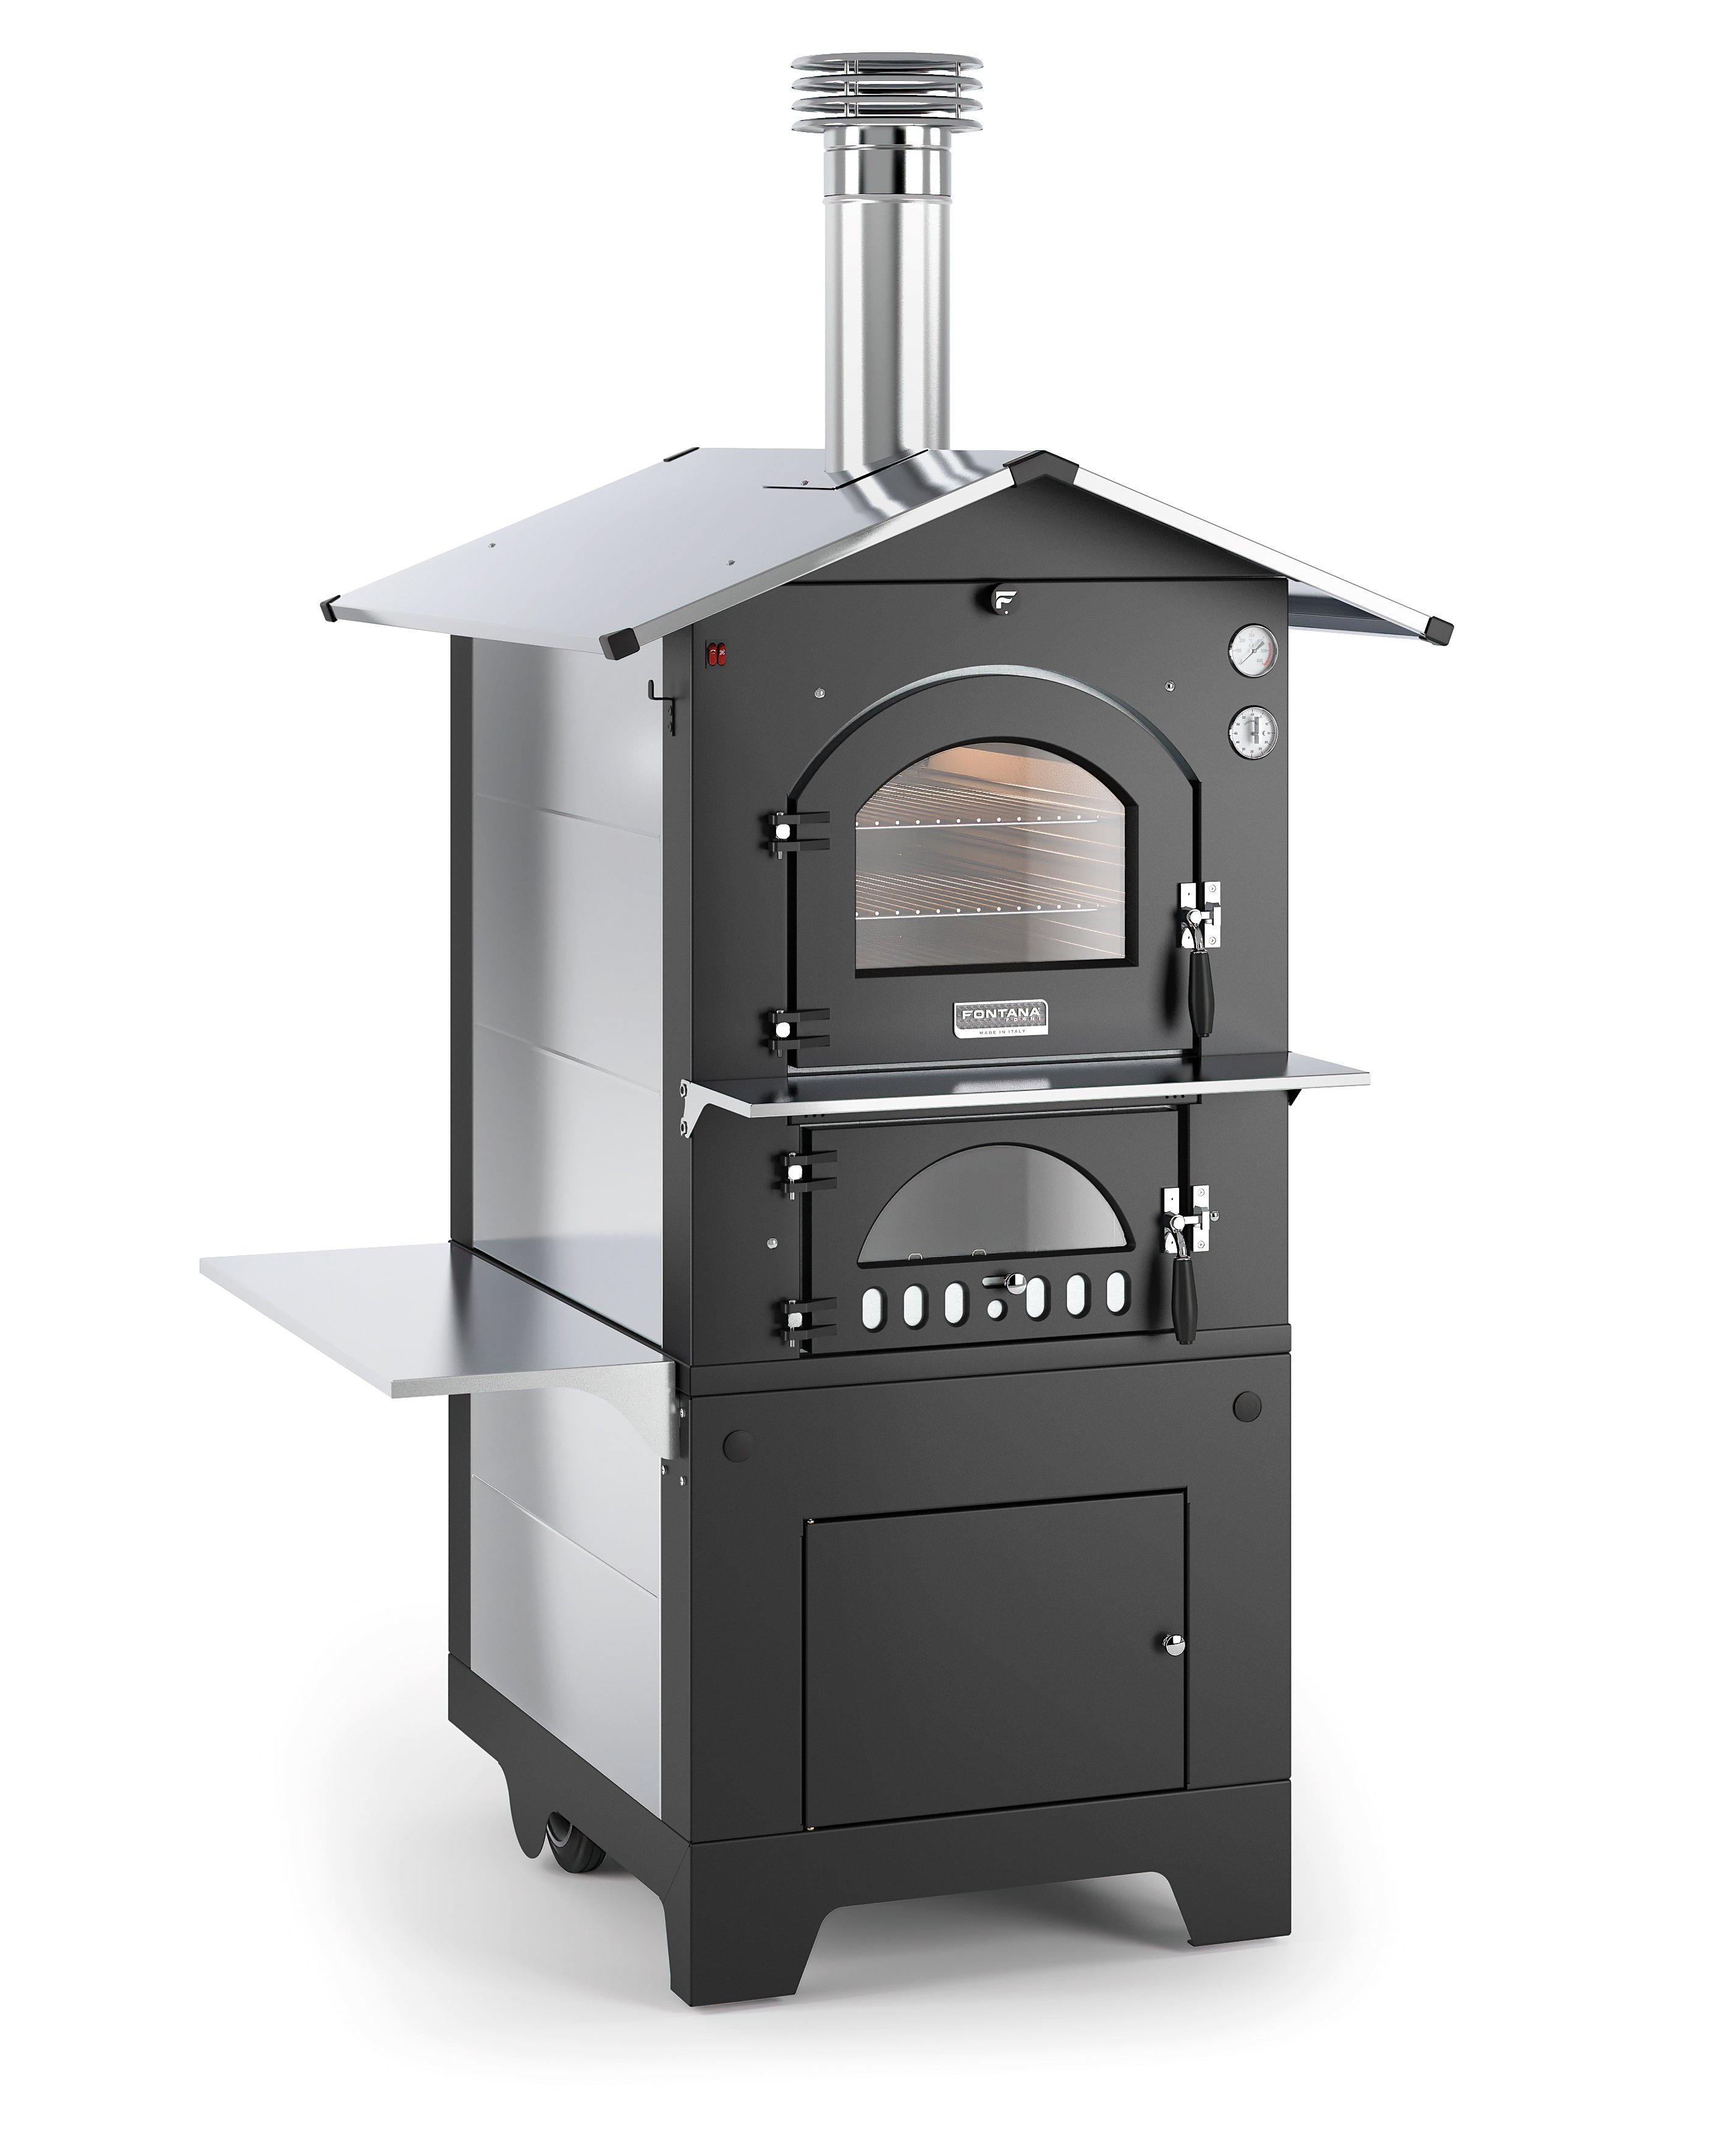 Bakehouse Fontana Gusto made of weatherproof stainless steel, cast iron oven door, indirect firing, three baking levels of 57x45cm each.